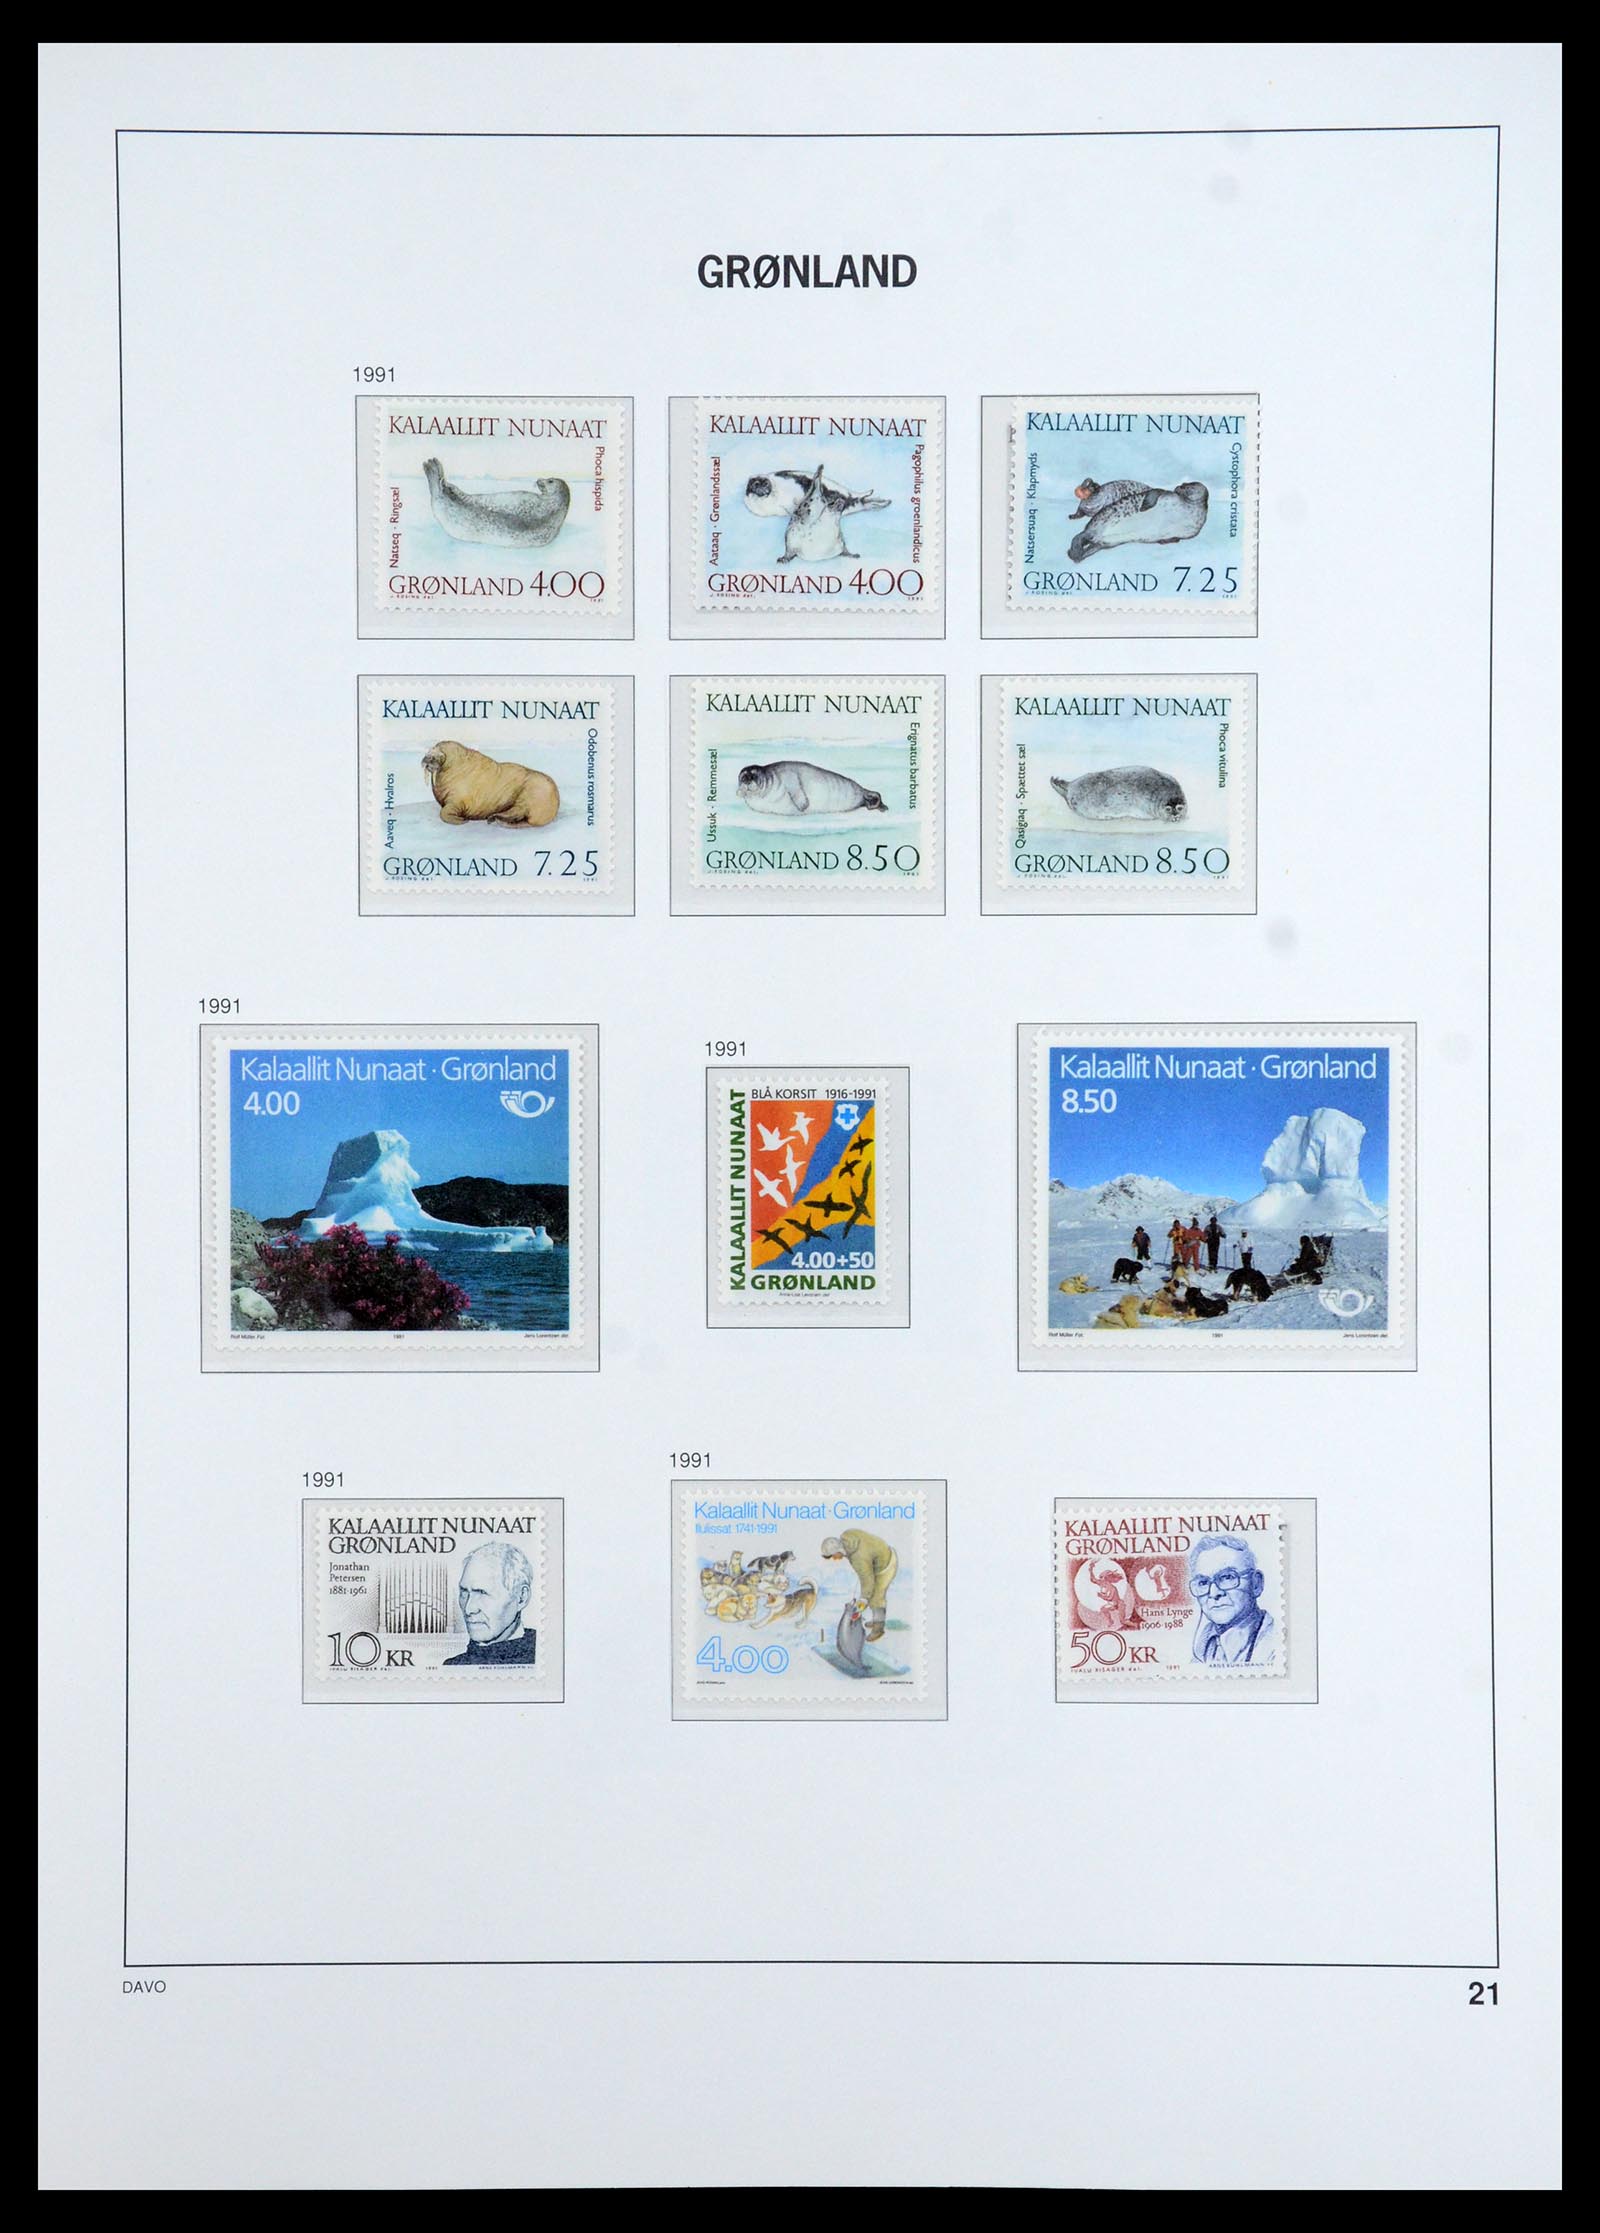 35773 021 - Stamp Collection 35773 Greenland 1905-1999.